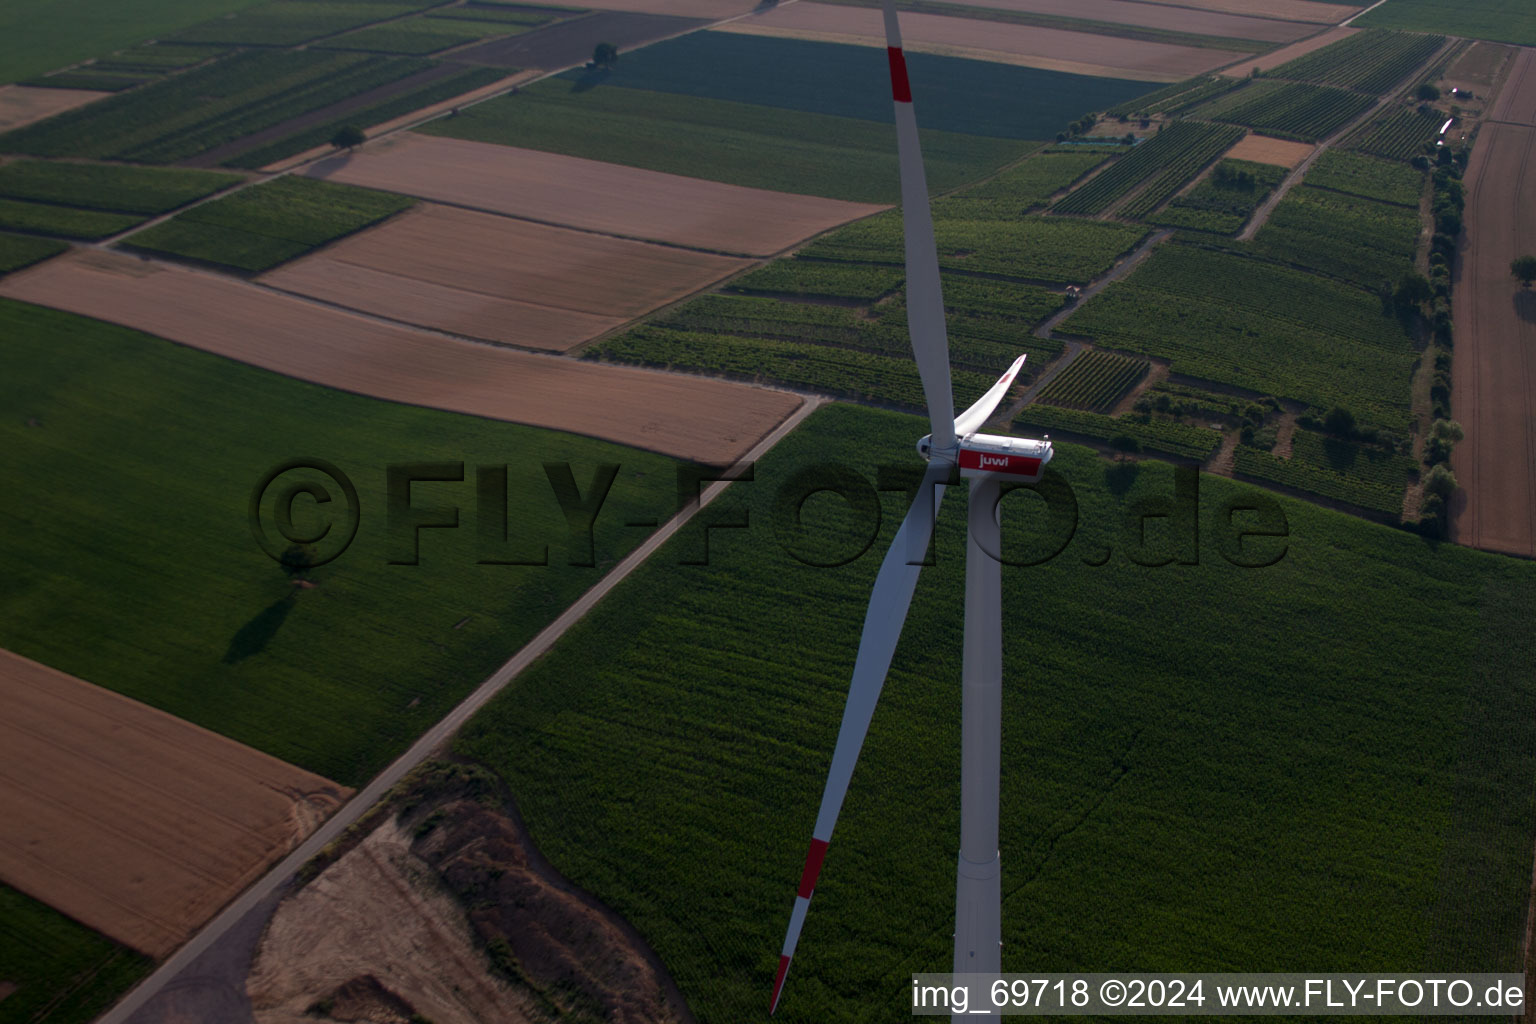 Wind farm construction in Offenbach an der Queich in the state Rhineland-Palatinate, Germany seen from above